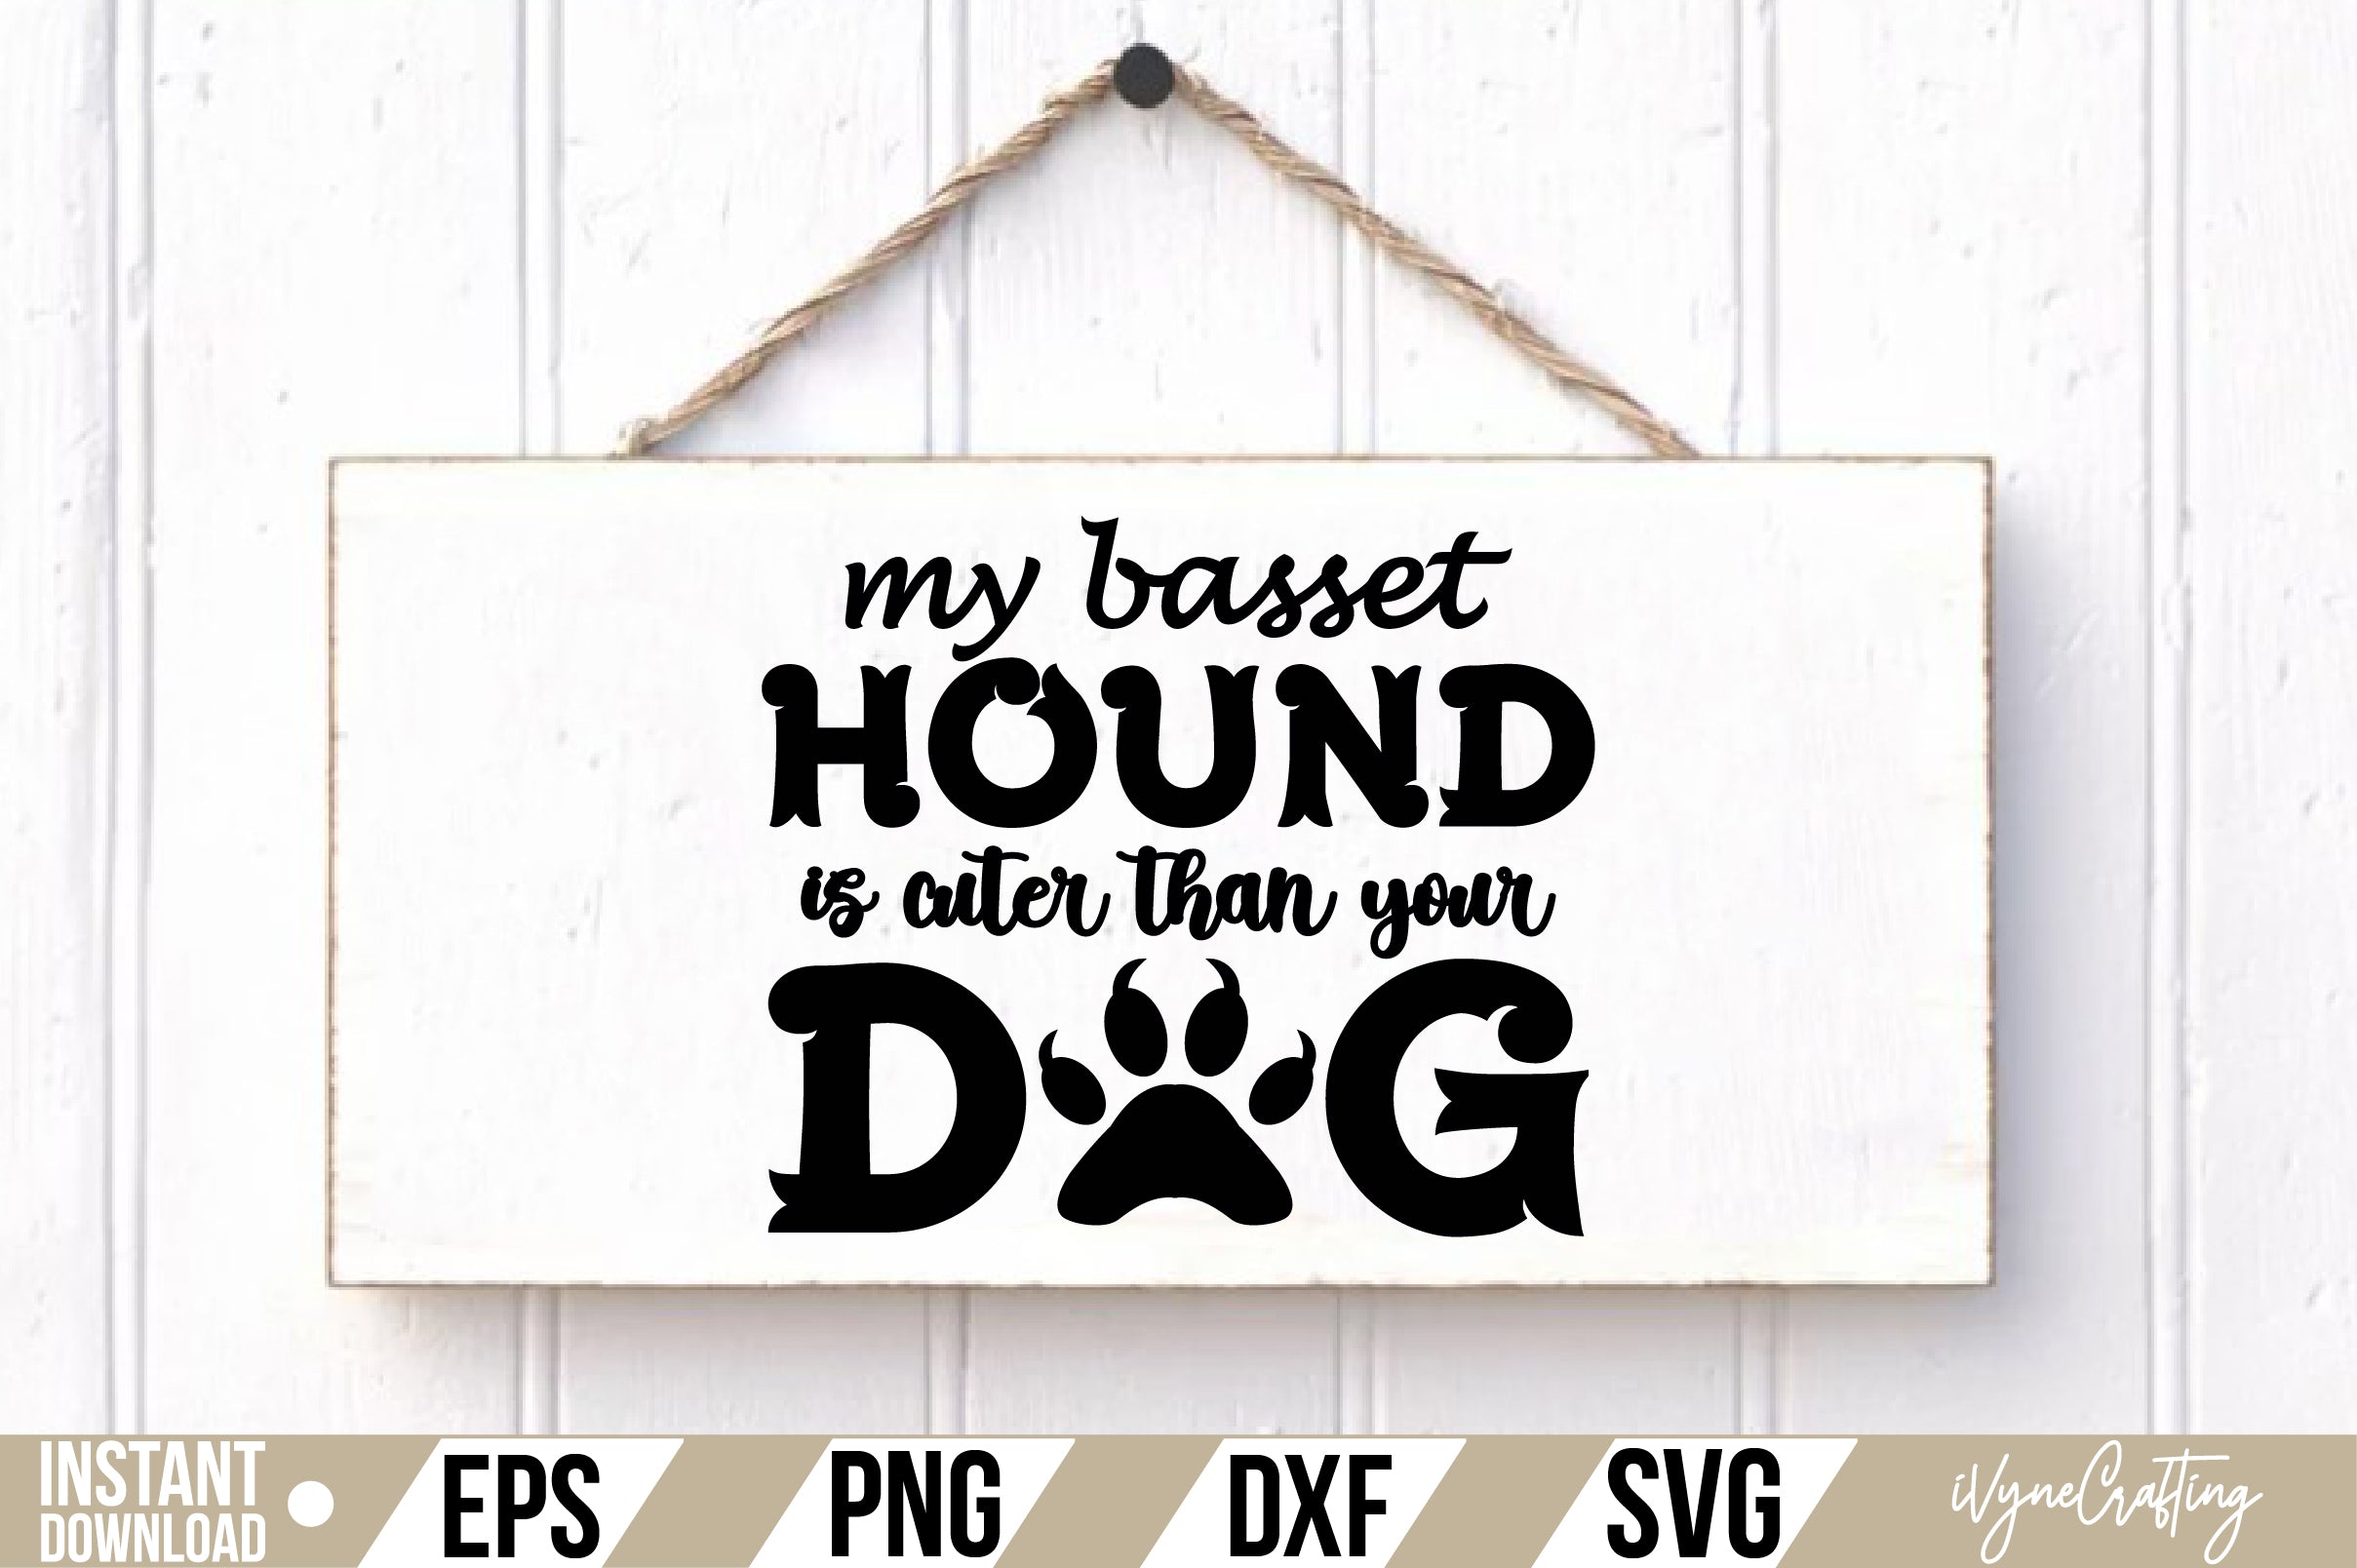 my basset hound is cuter than your dog SVG Cut File